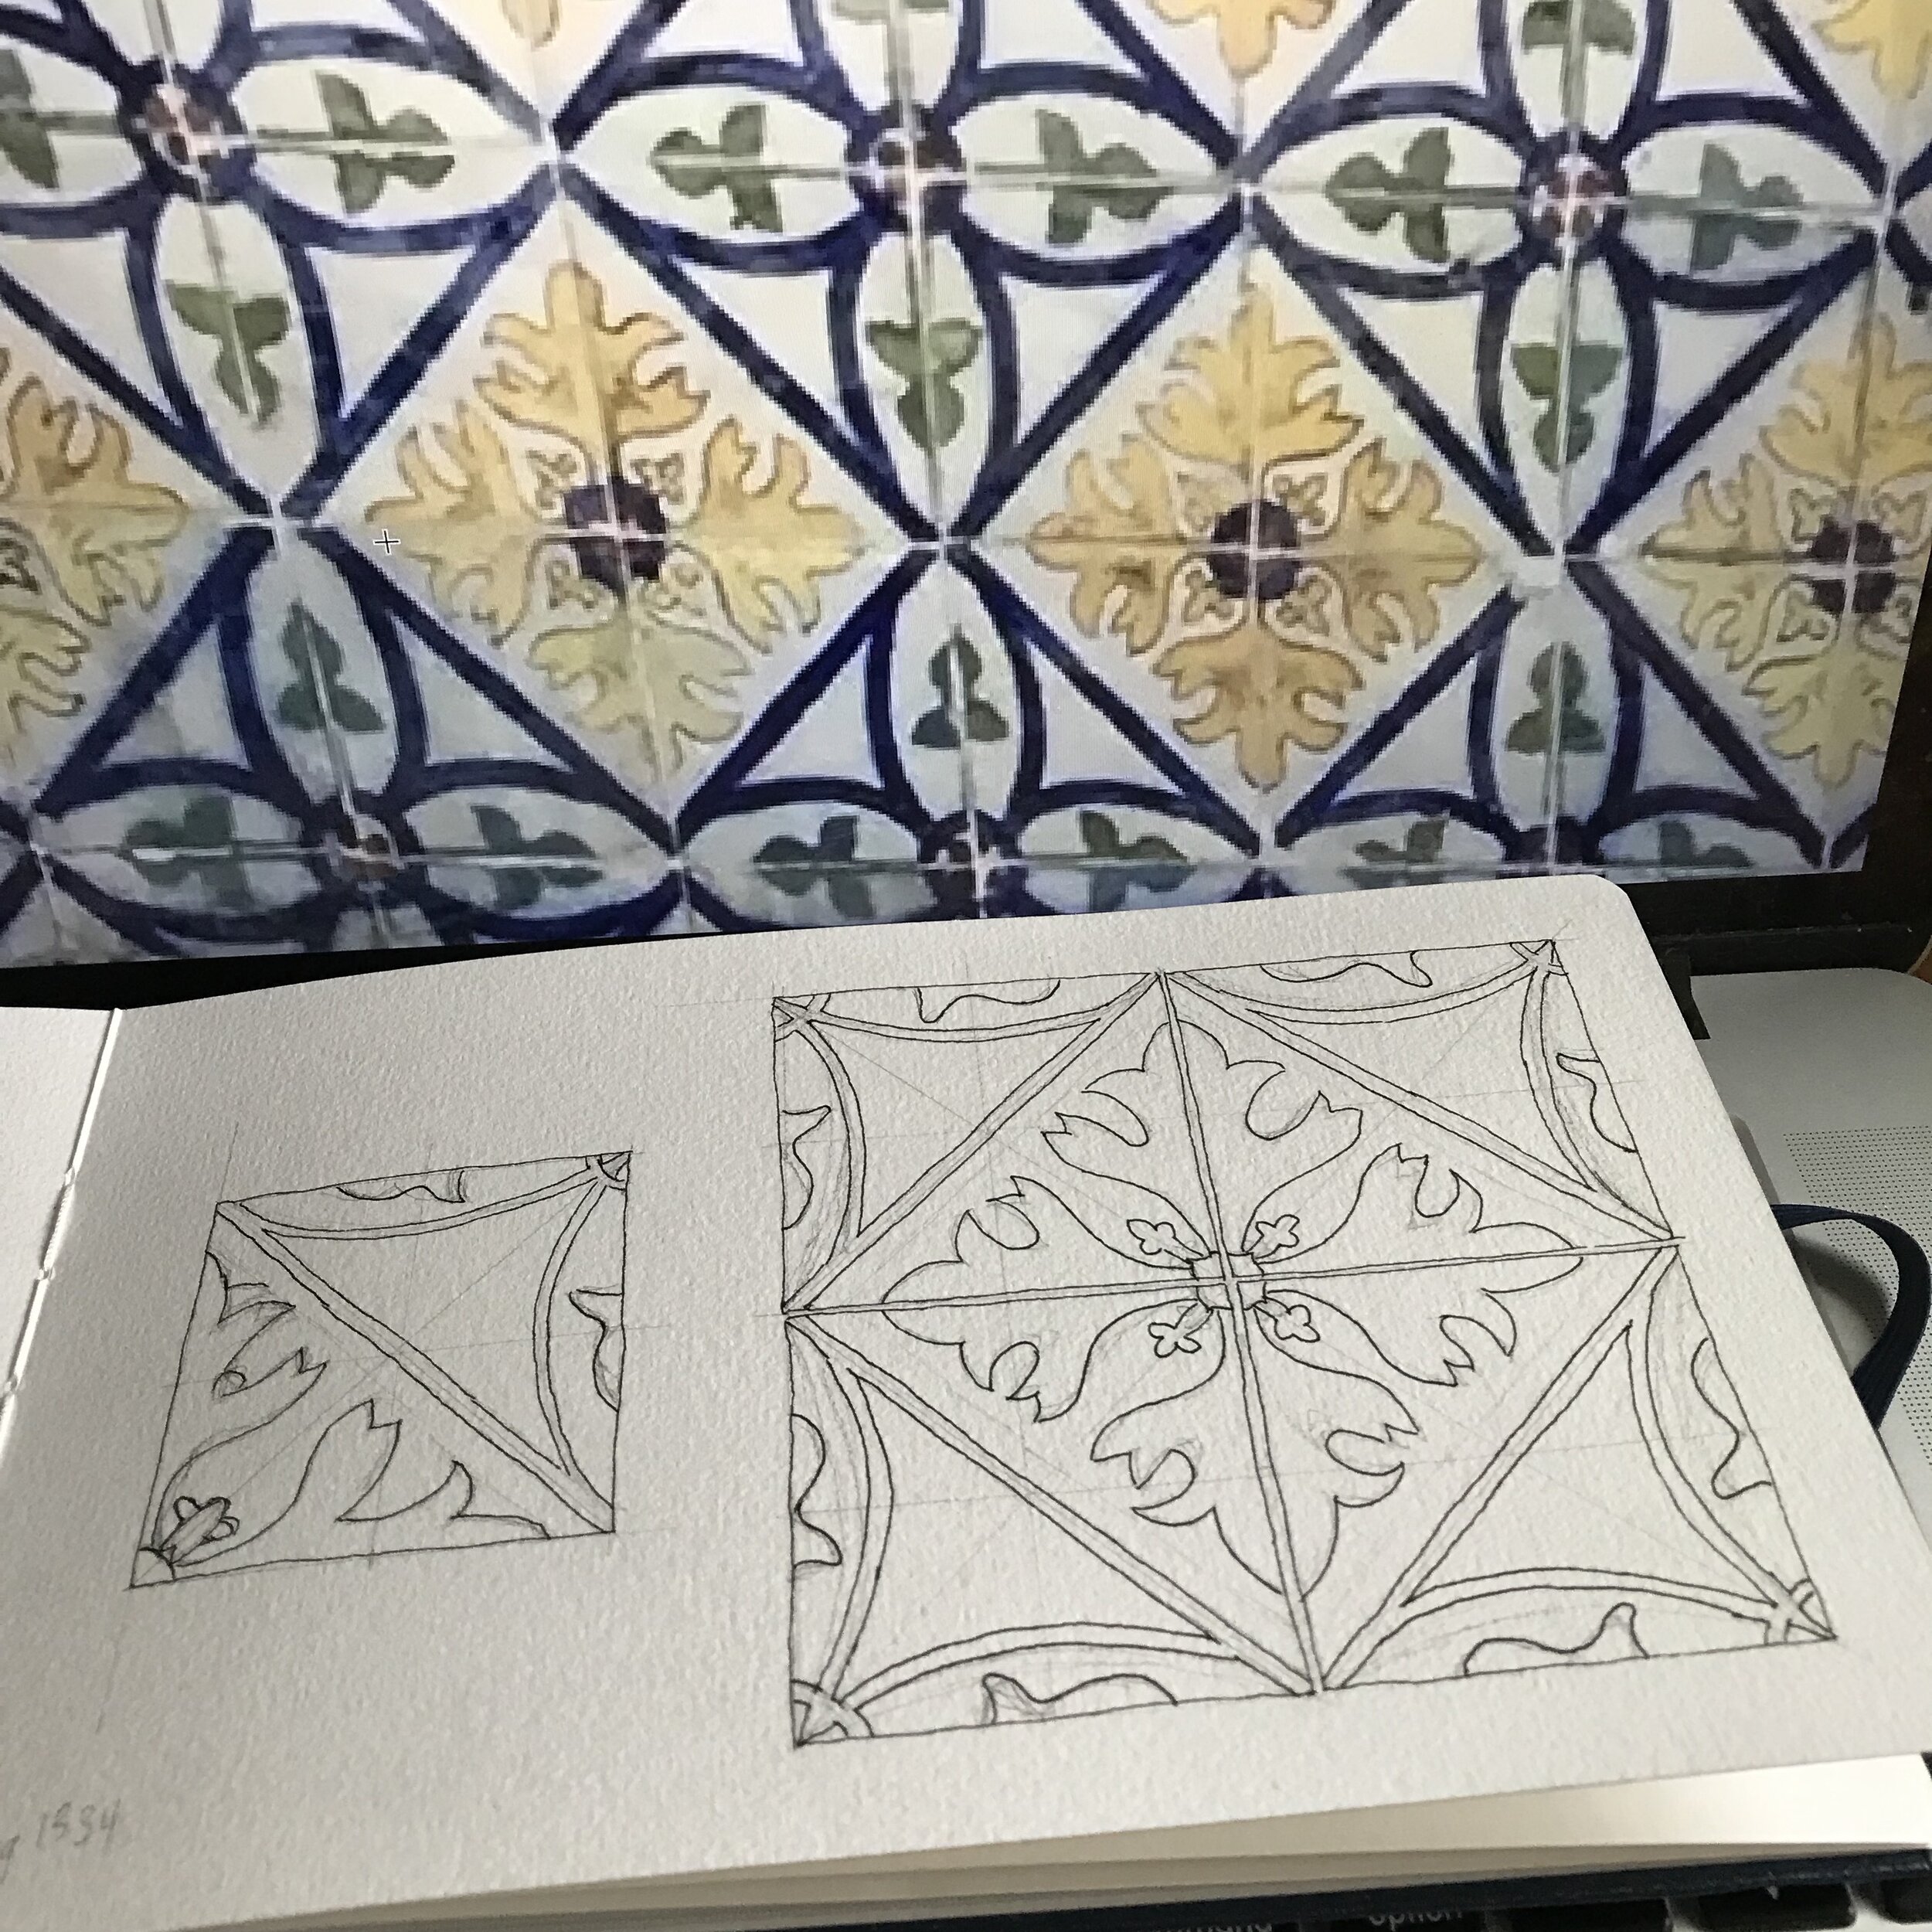 Pattern in sketchbook with enlarged photo reference of tiles in the background